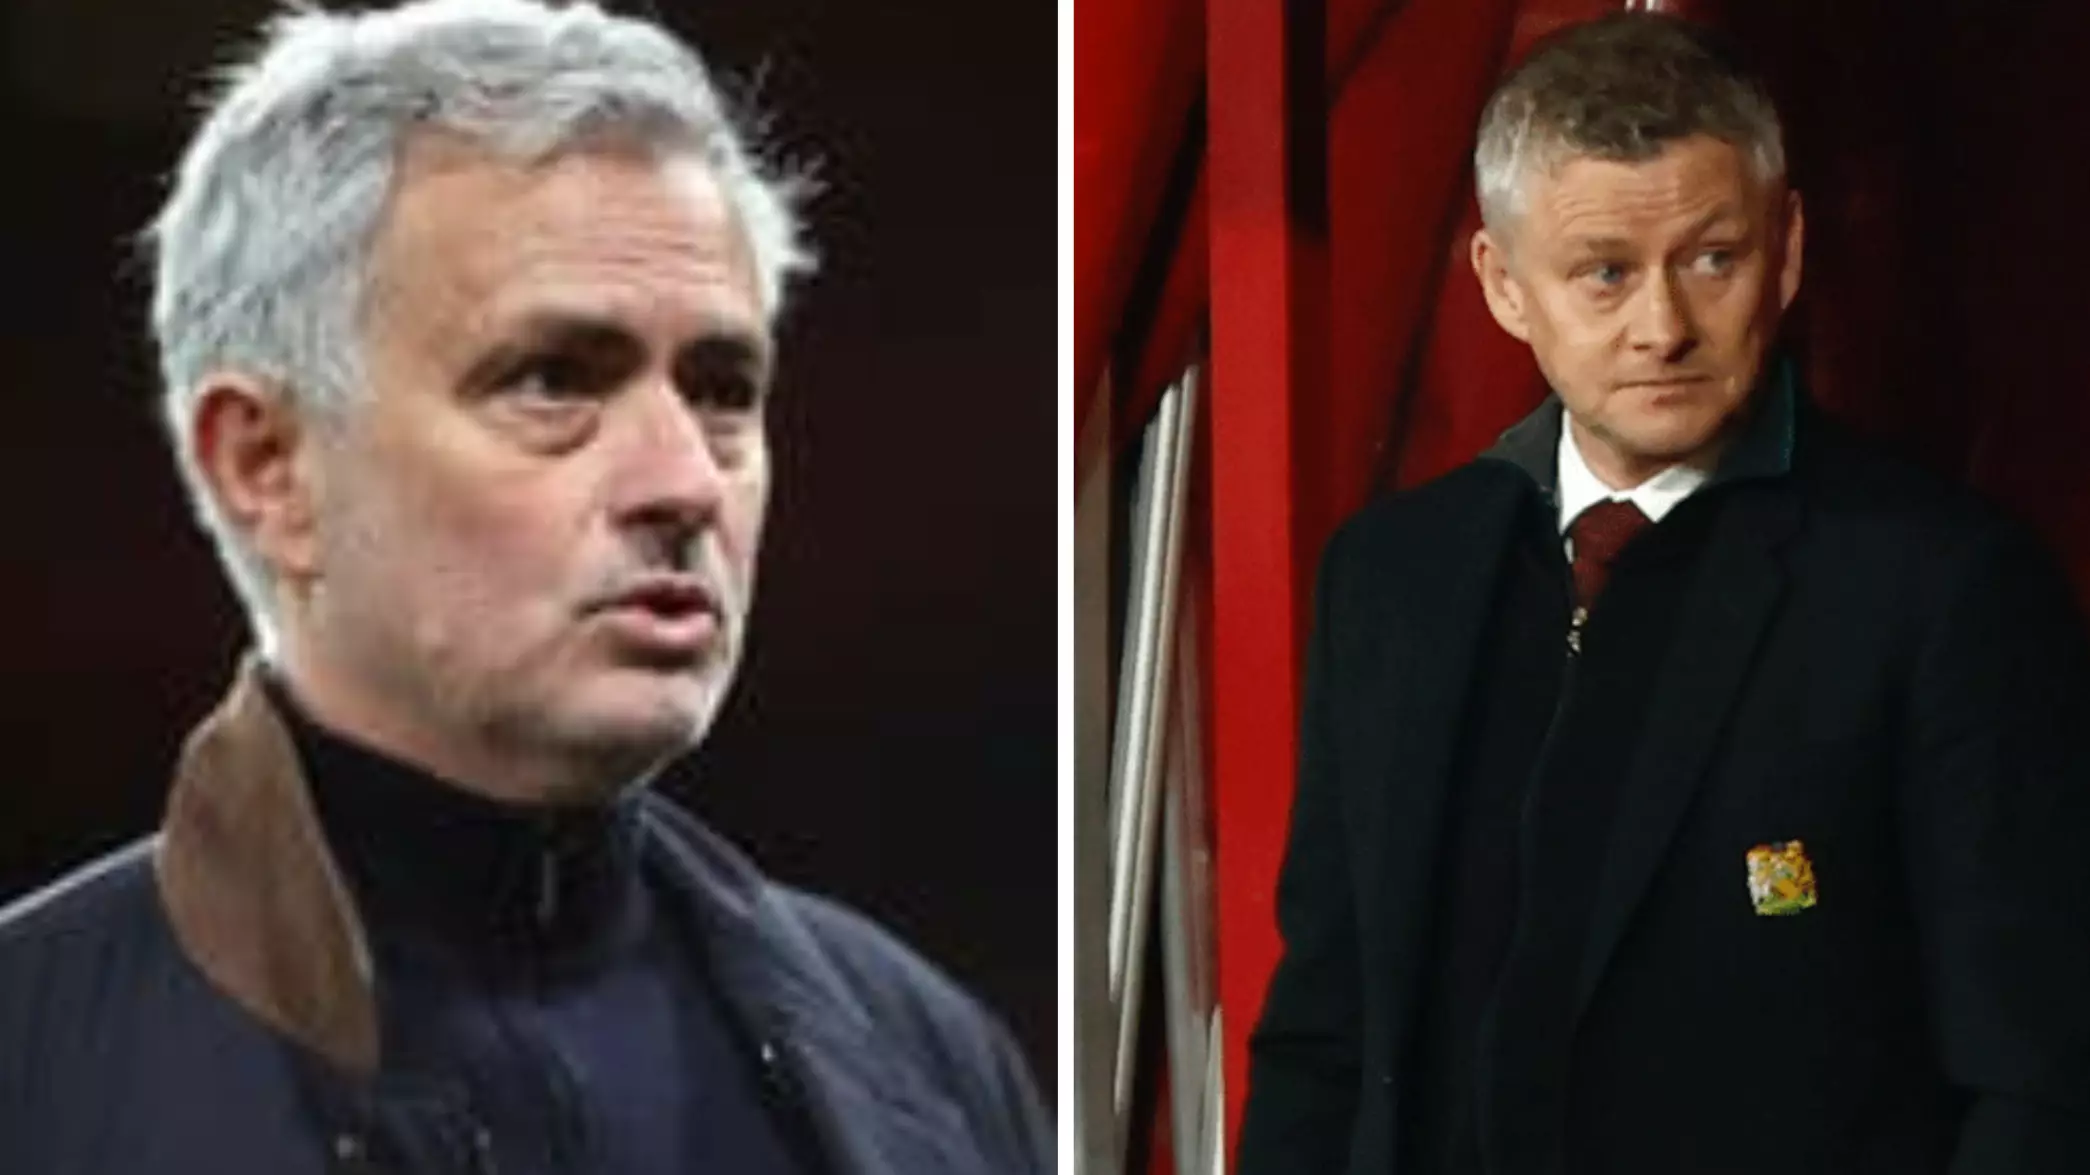 Jose Mourinho Takes Aim At Ole Gunnar Solskjaer Over Manchester United’s Lack Of Silverware Under The Norwegian